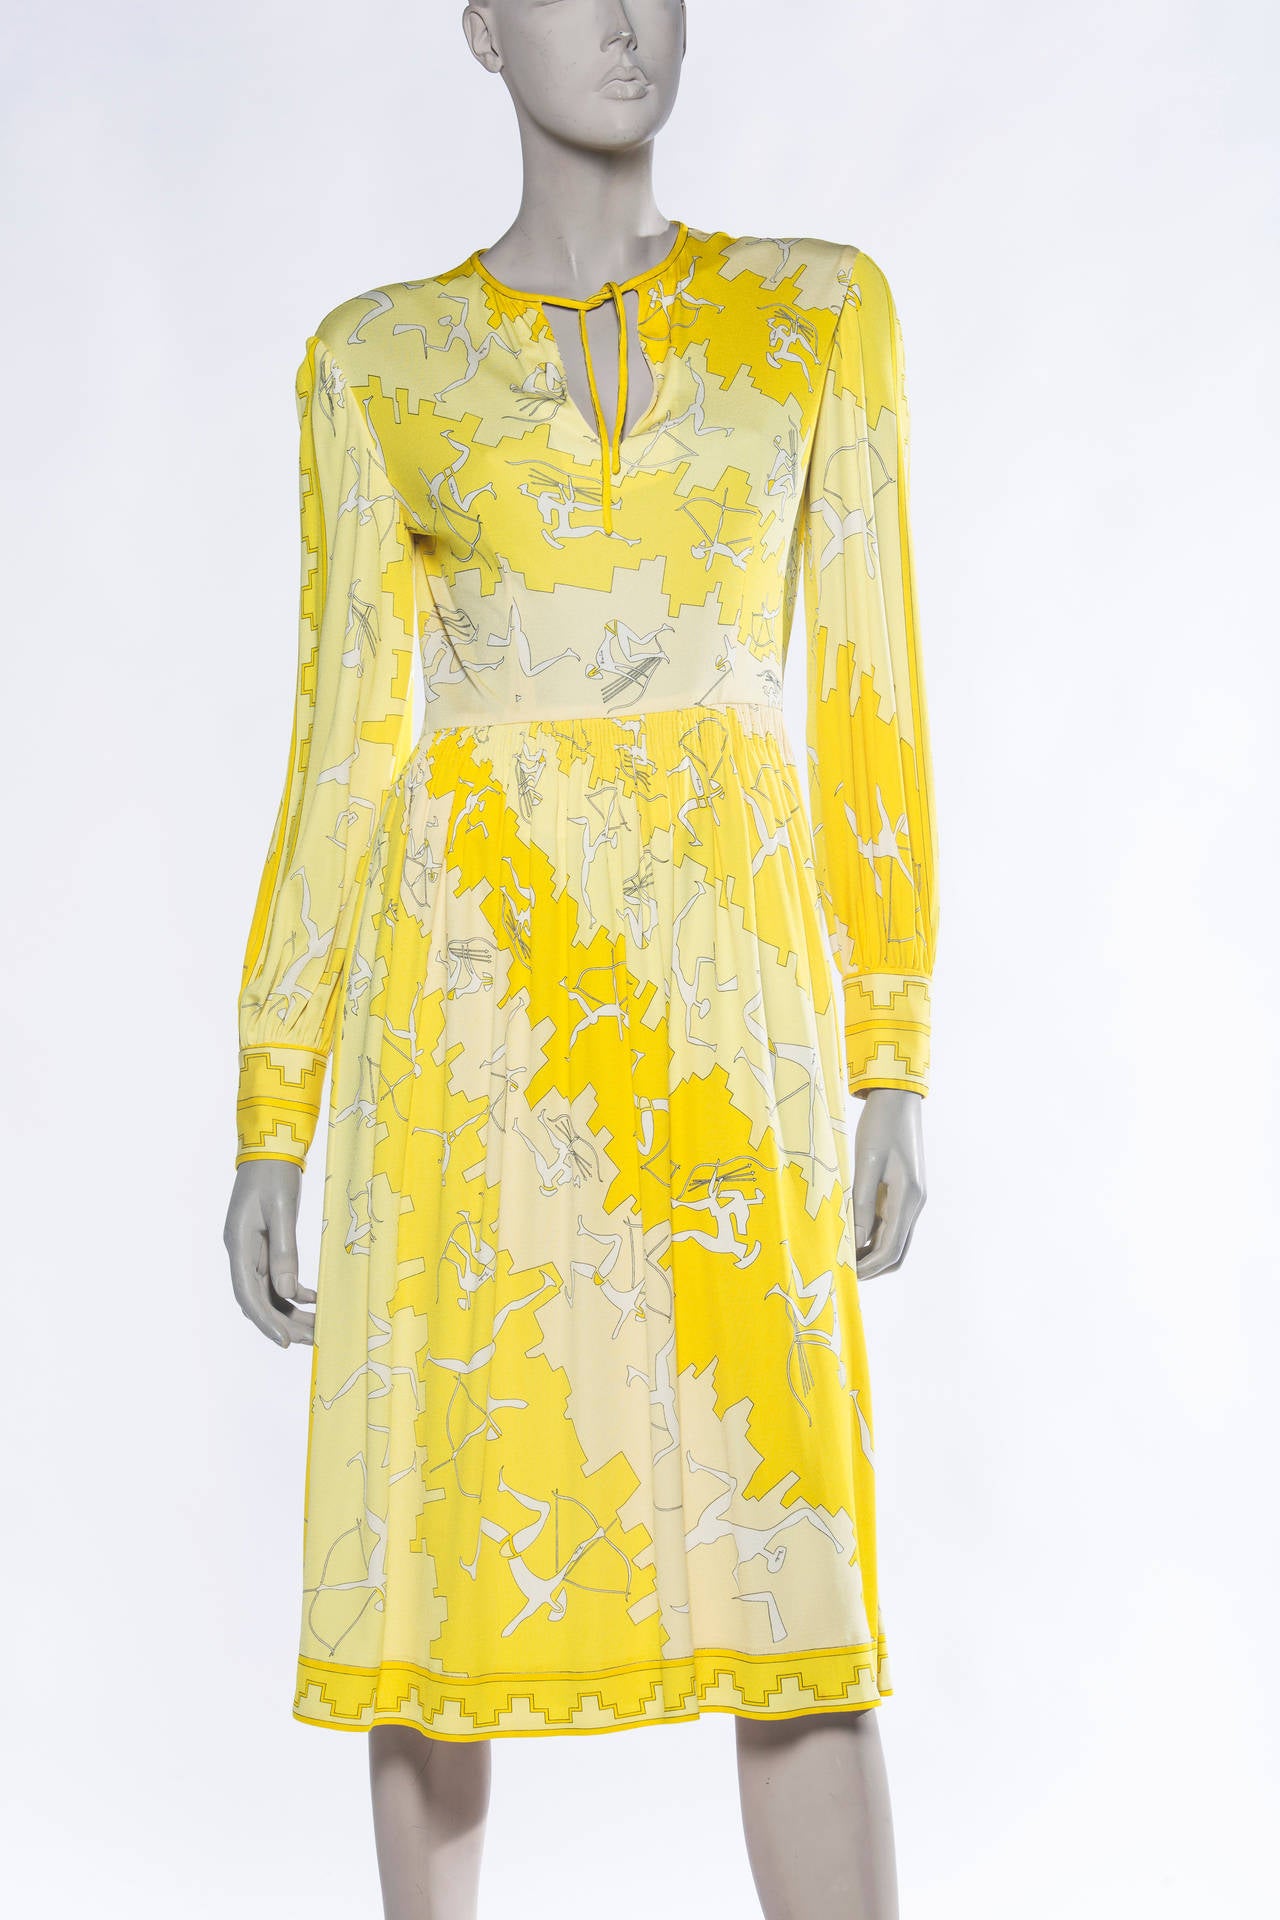 Emilio Pucci silk jersey dress with archery-inspired pattern and the 